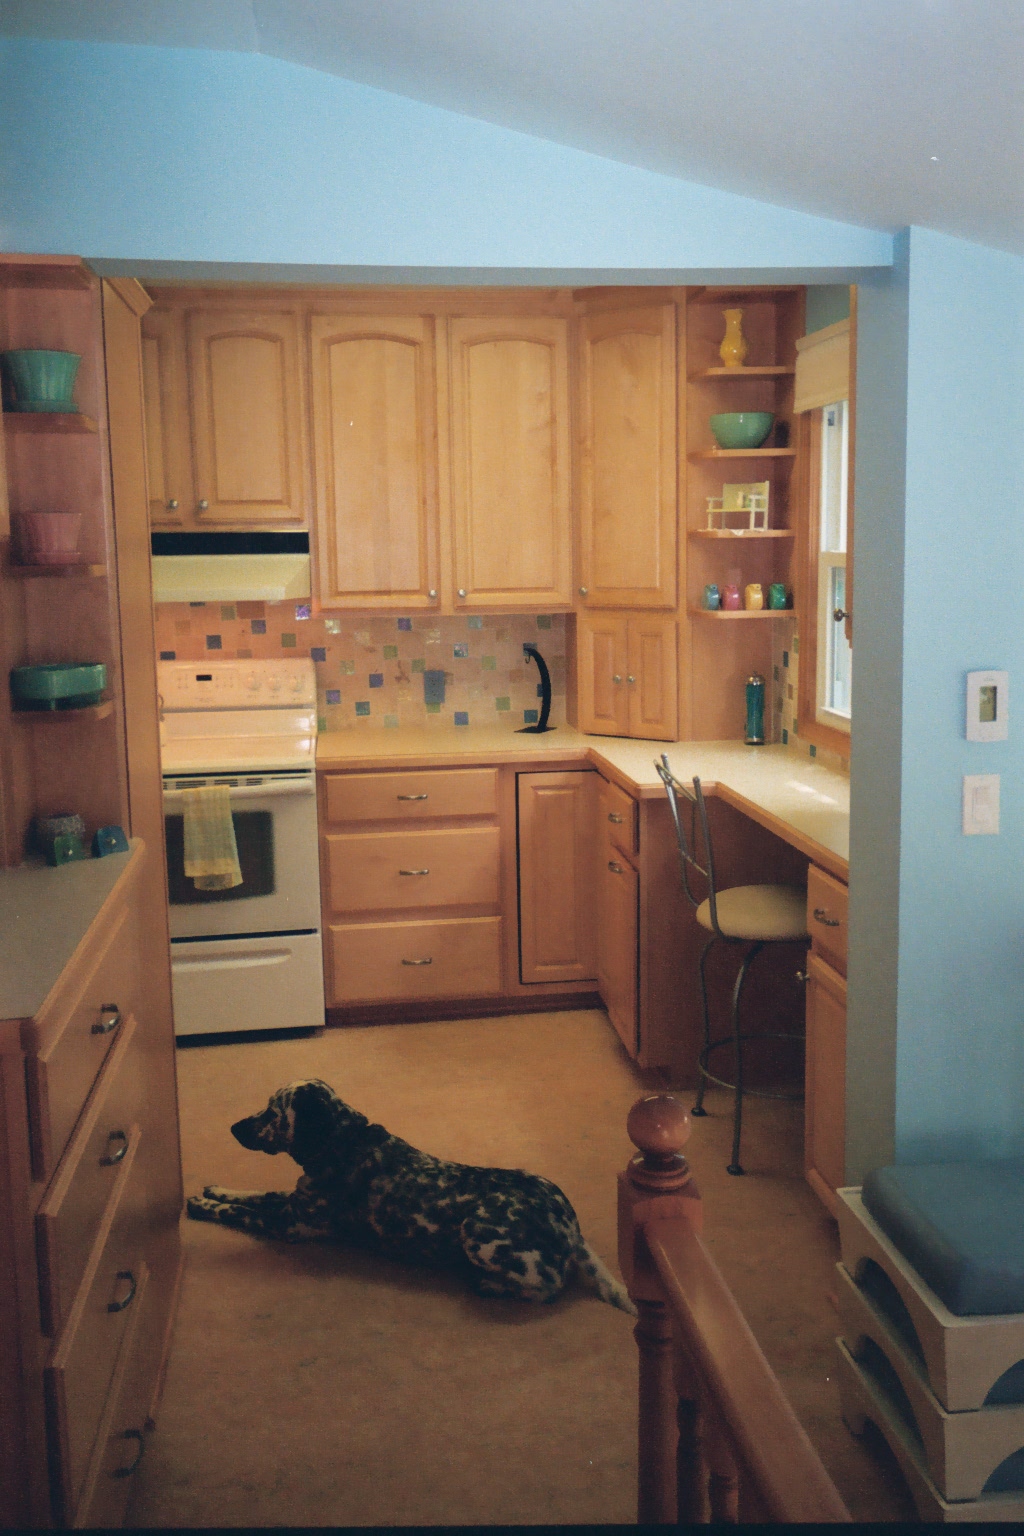 Standing in front of the utility cabinet, looking back at the main part of the kitchen.